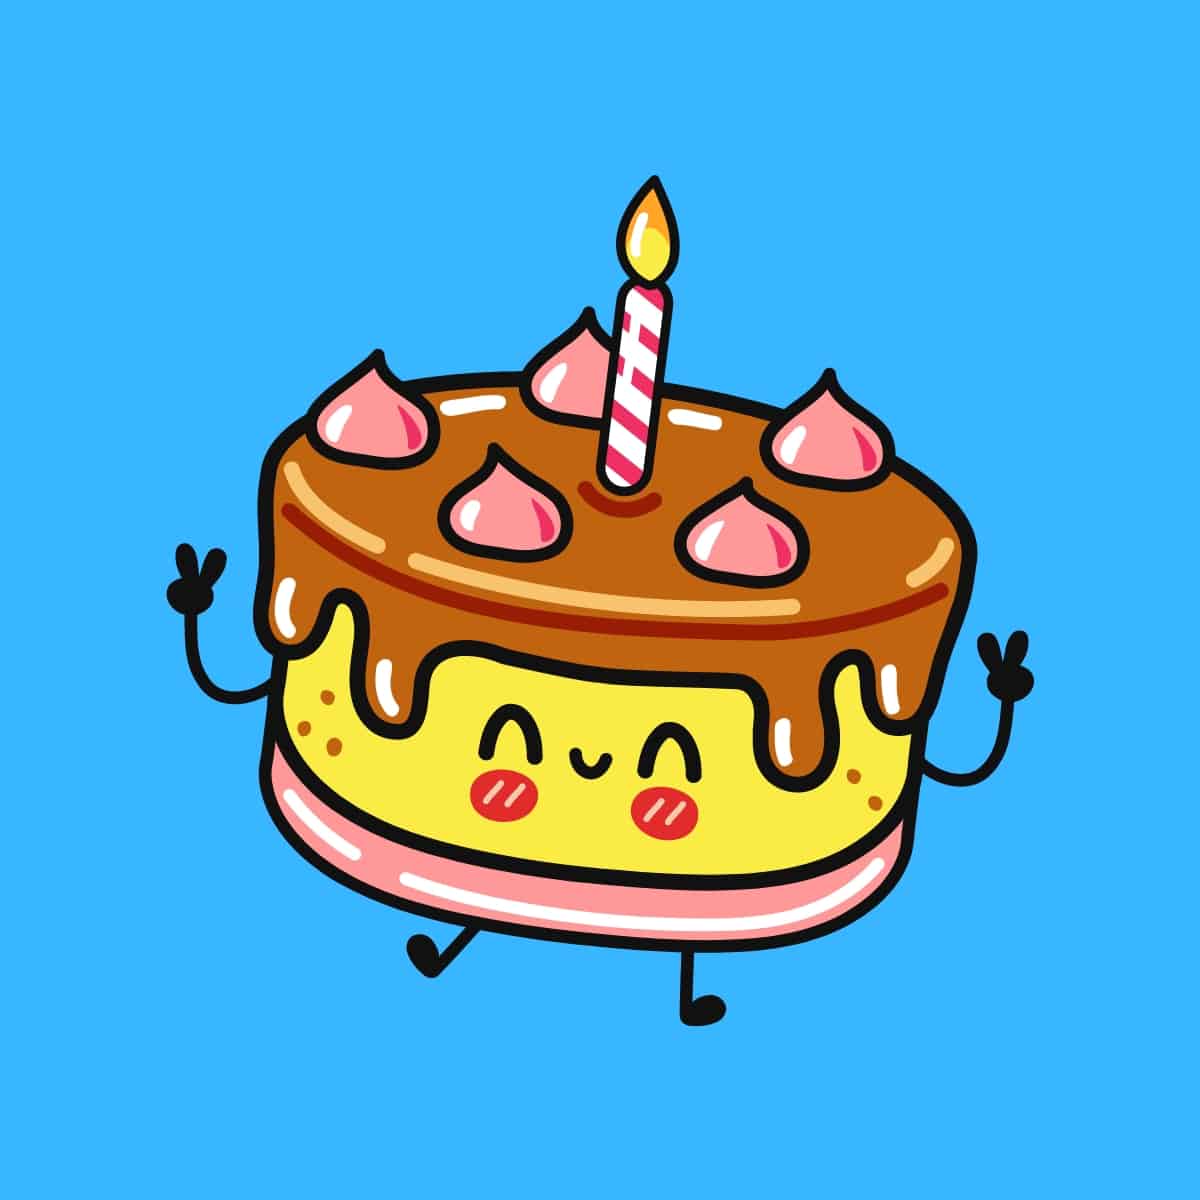 Cartoon graphic of a birthday cake witha candle doing the peace signs while standing and smiling on a blue background.